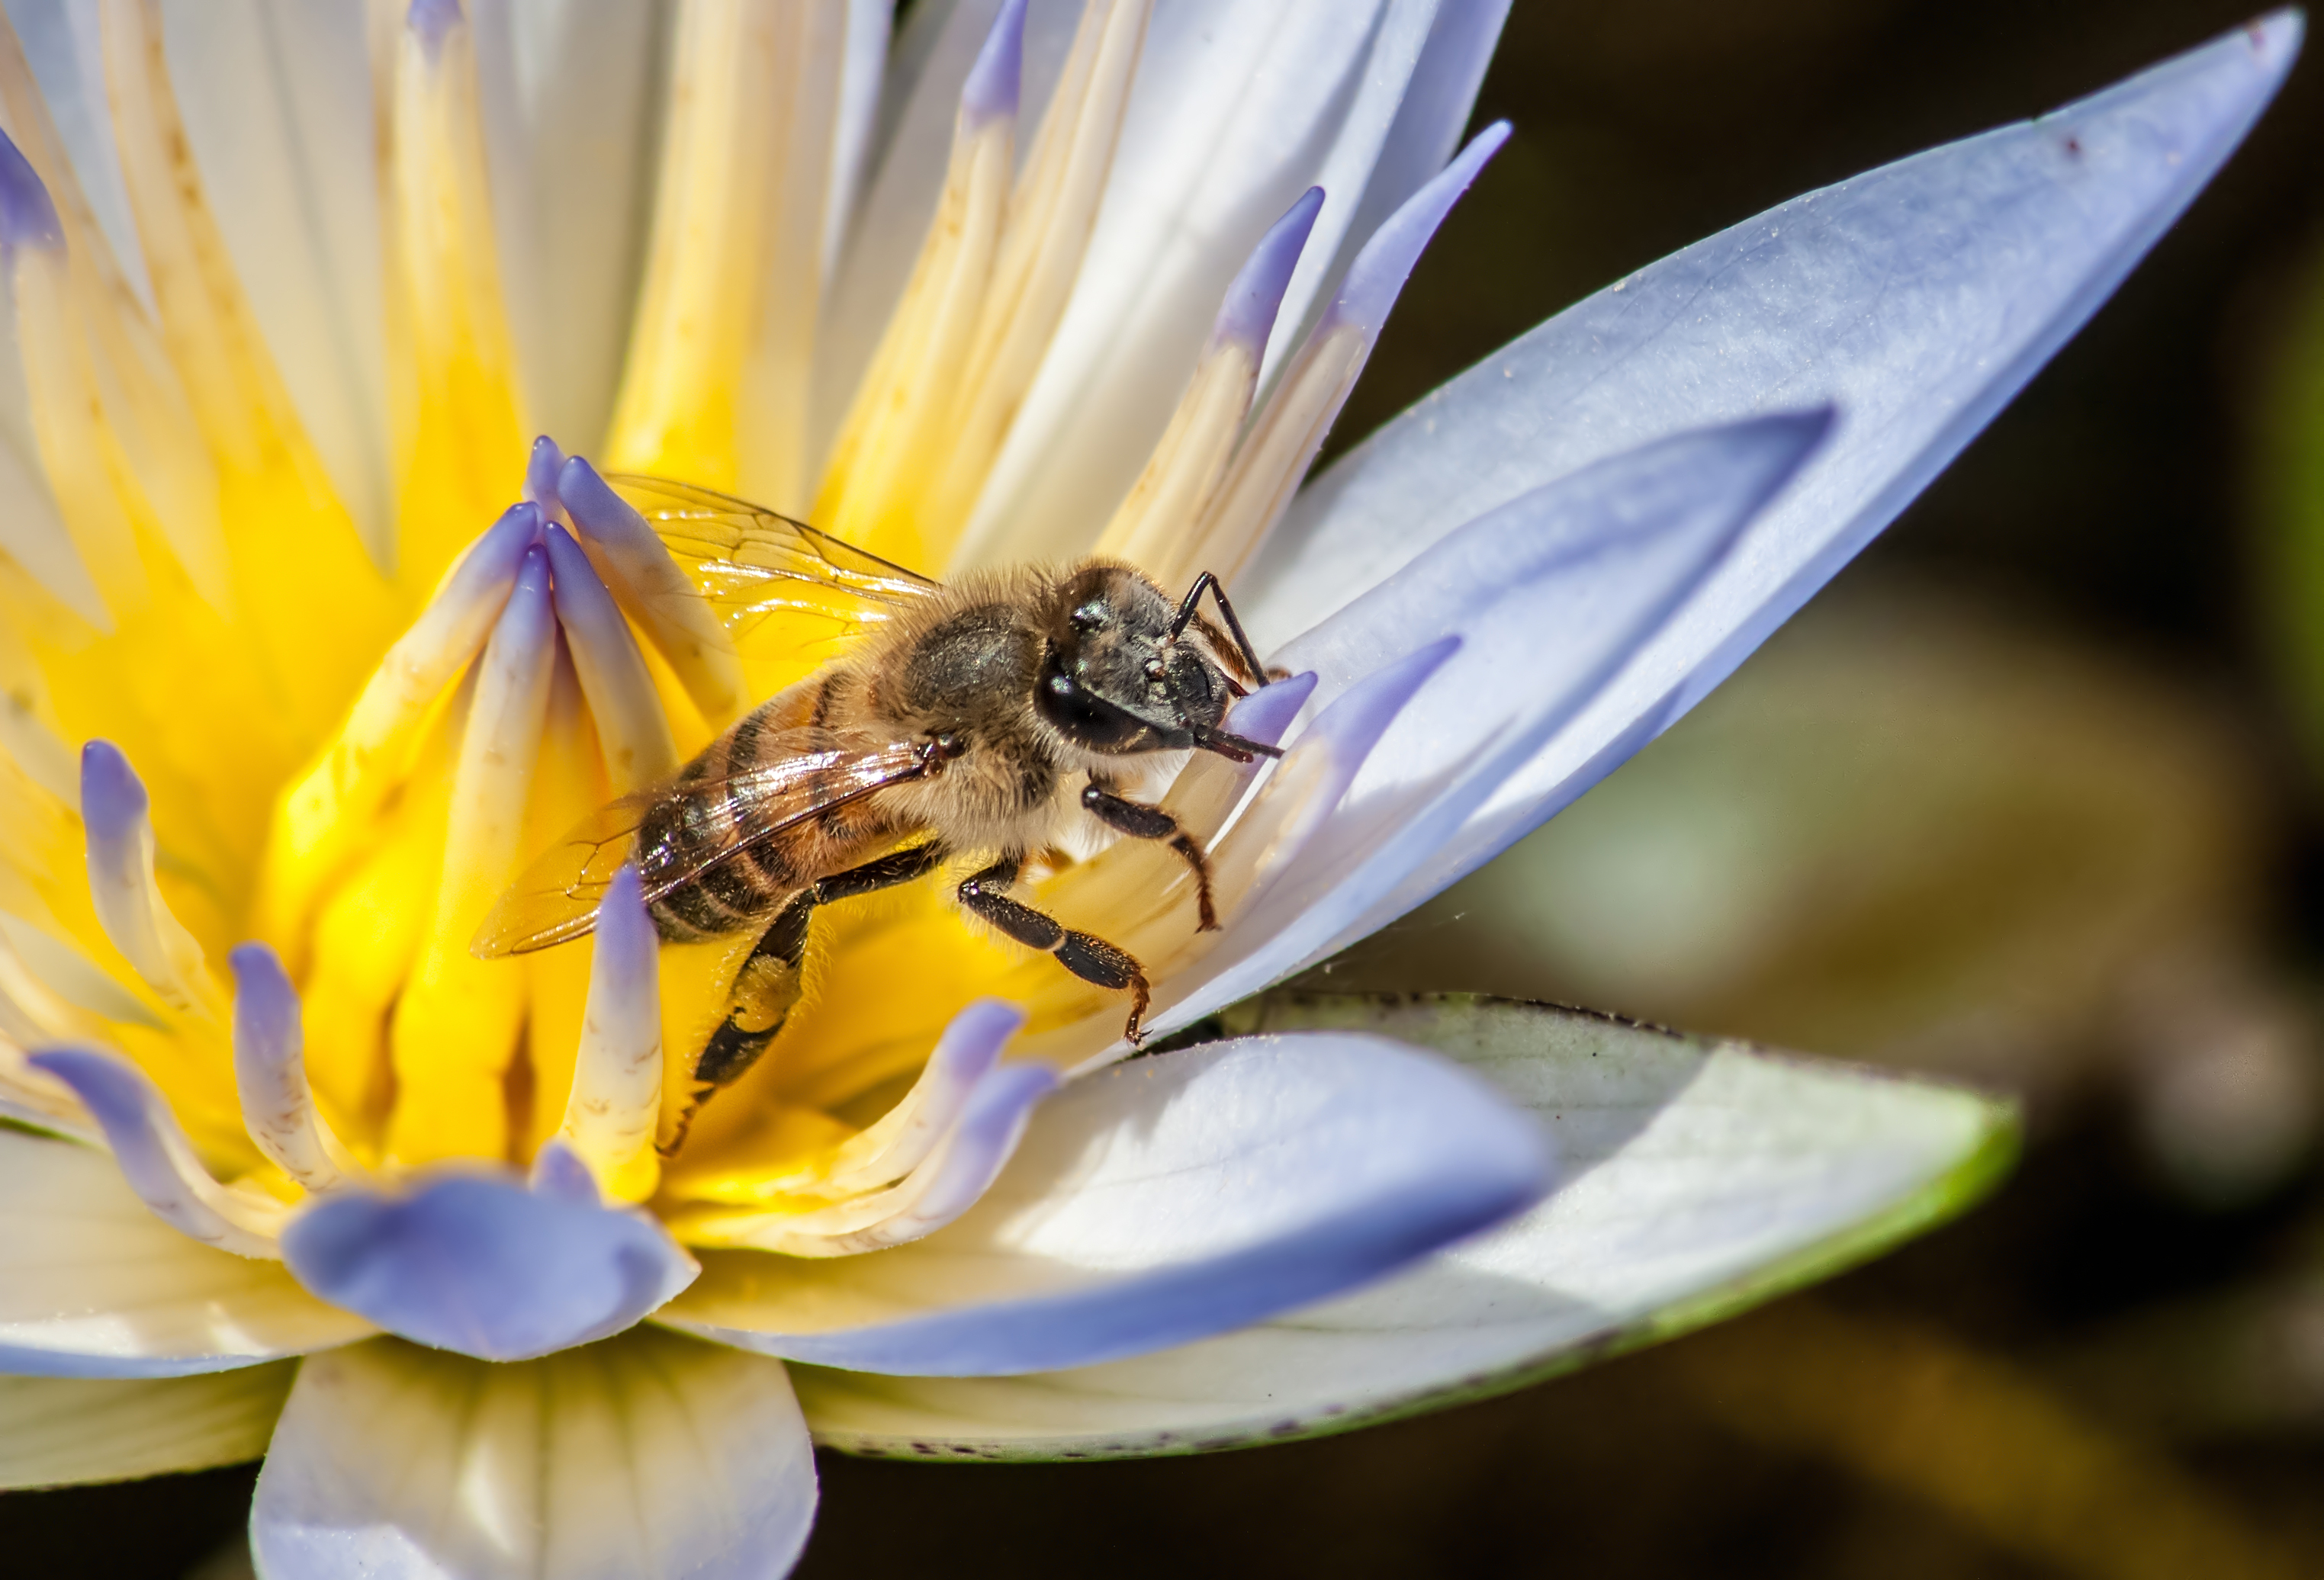 African Honey Bee by The Photographer